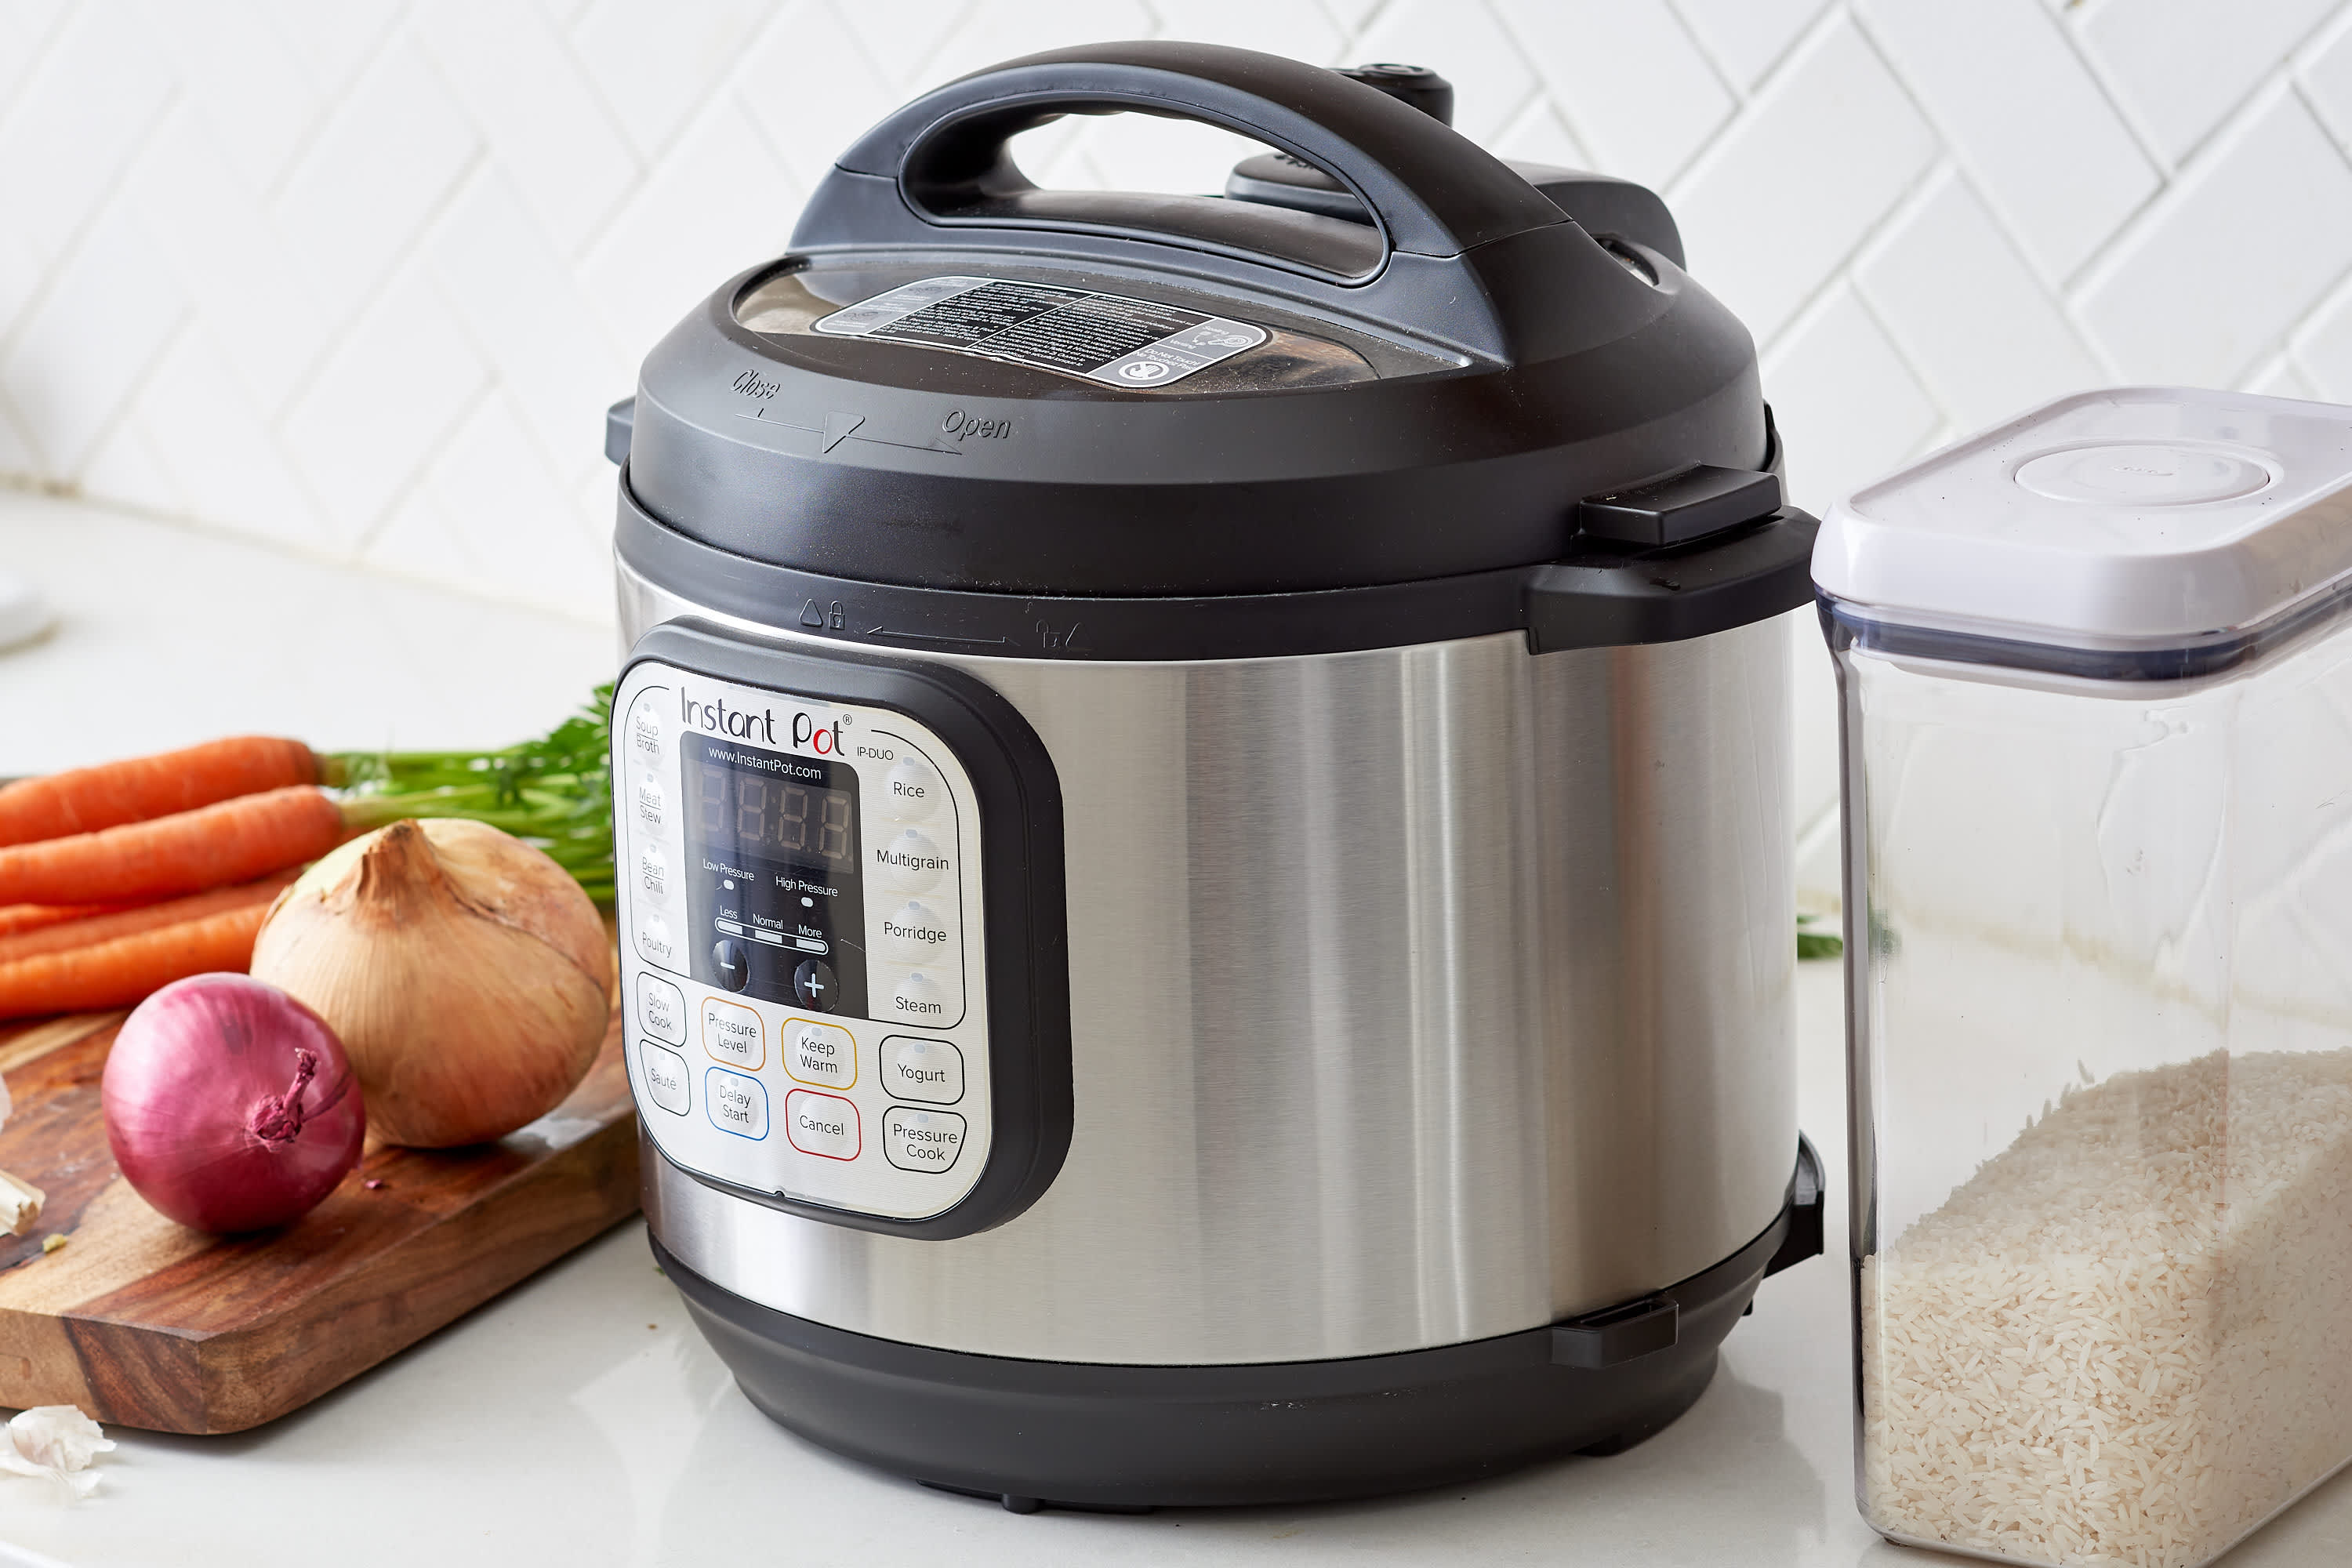 How To Clean an Instant Pot | The Kitchn